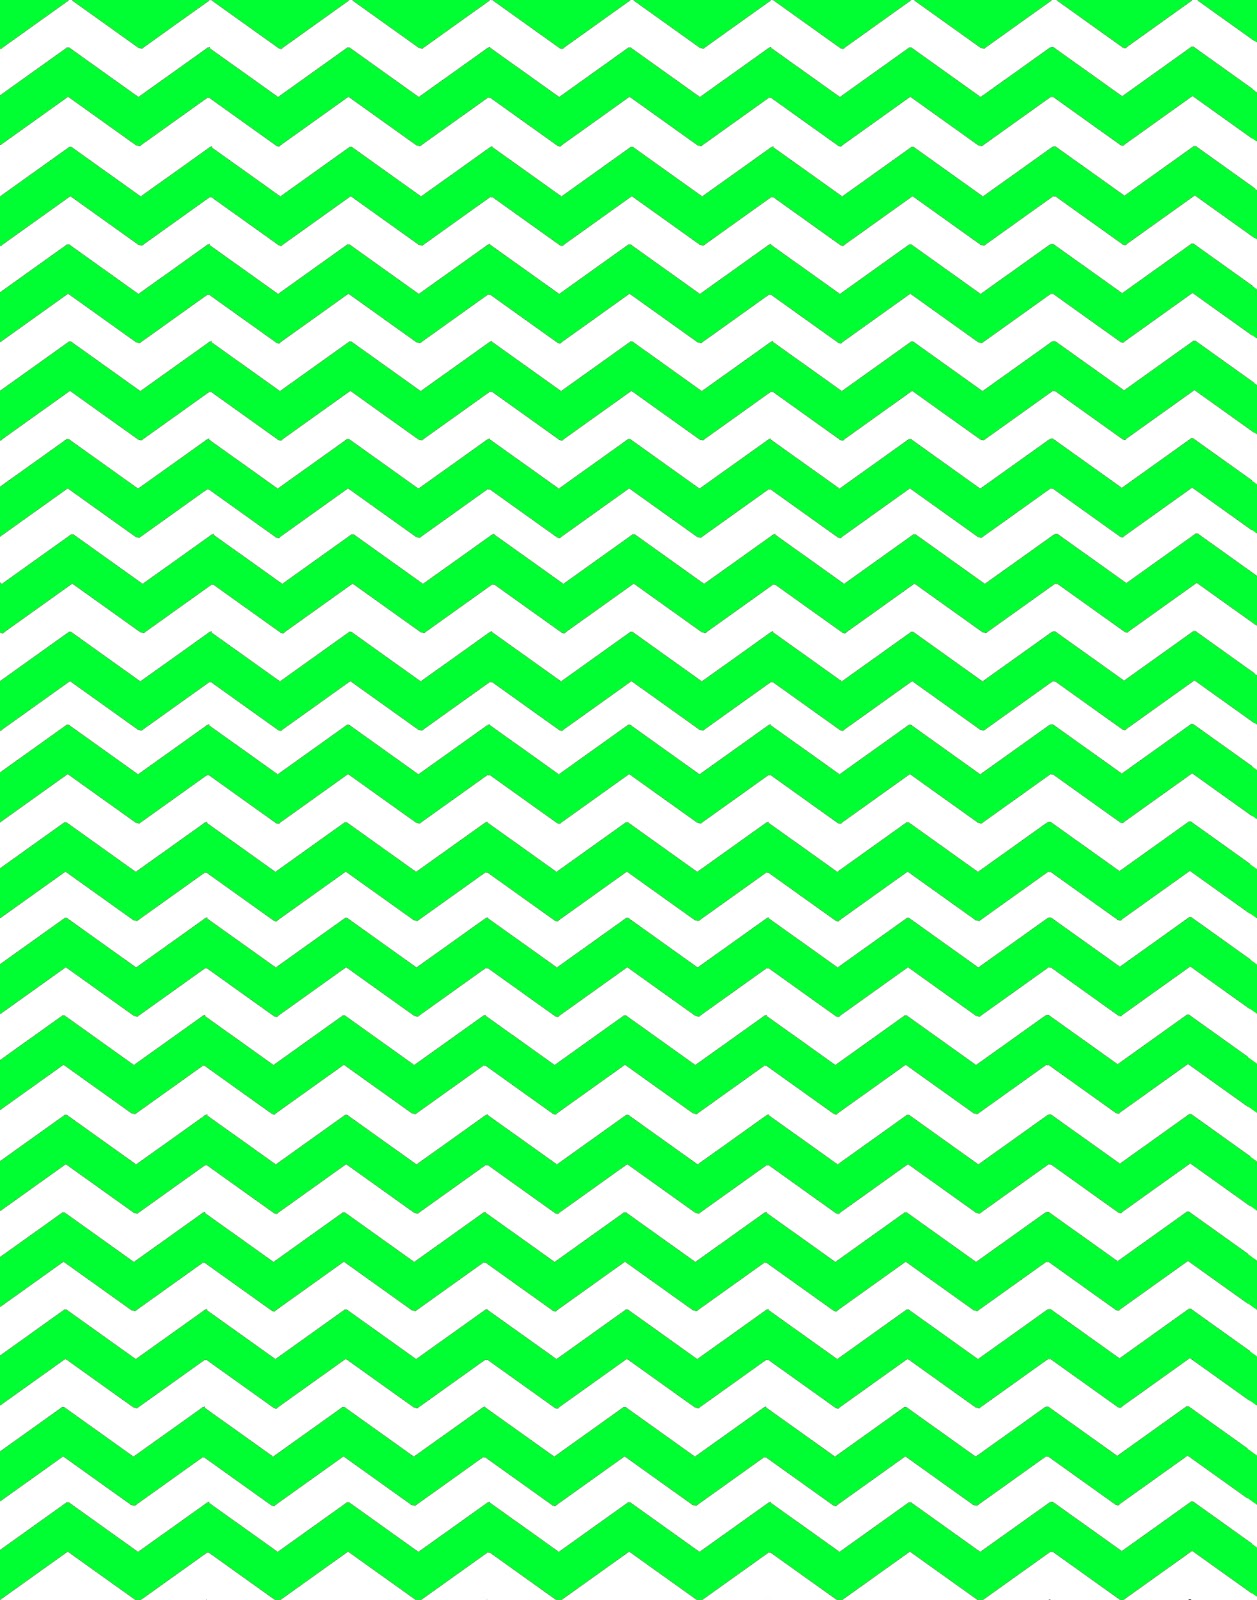 16 New Colors Chevron Background Patterns - Green Chevron Background Paper - HD Wallpaper 